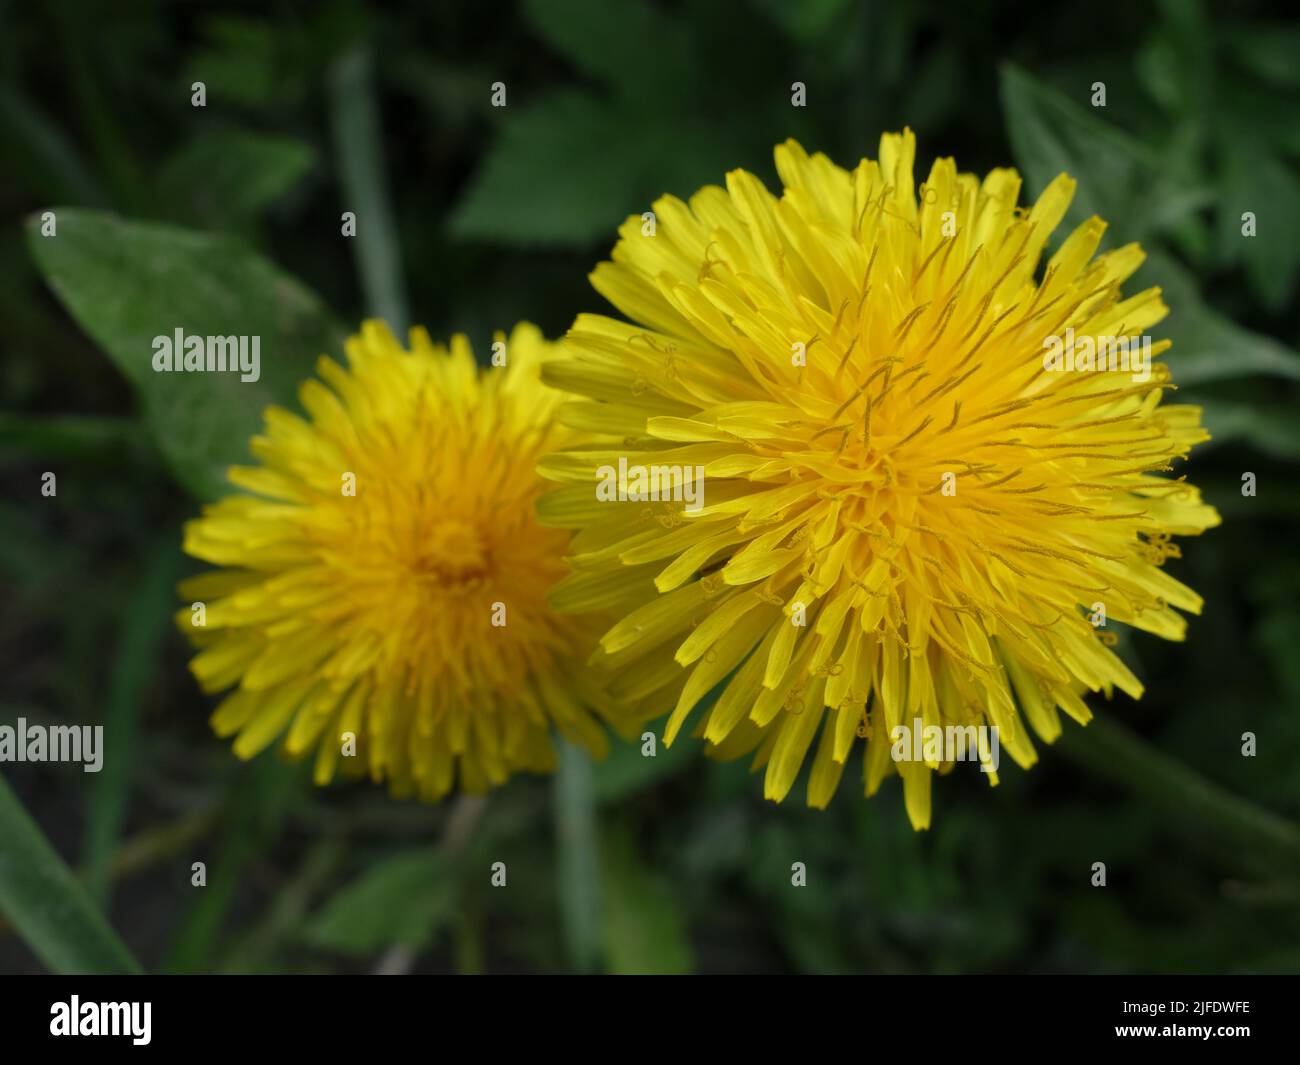 Two dandelions, Taraxacum officinale, standing close together. Dandelion symbolizes hope, healing and growth. Stock Photo